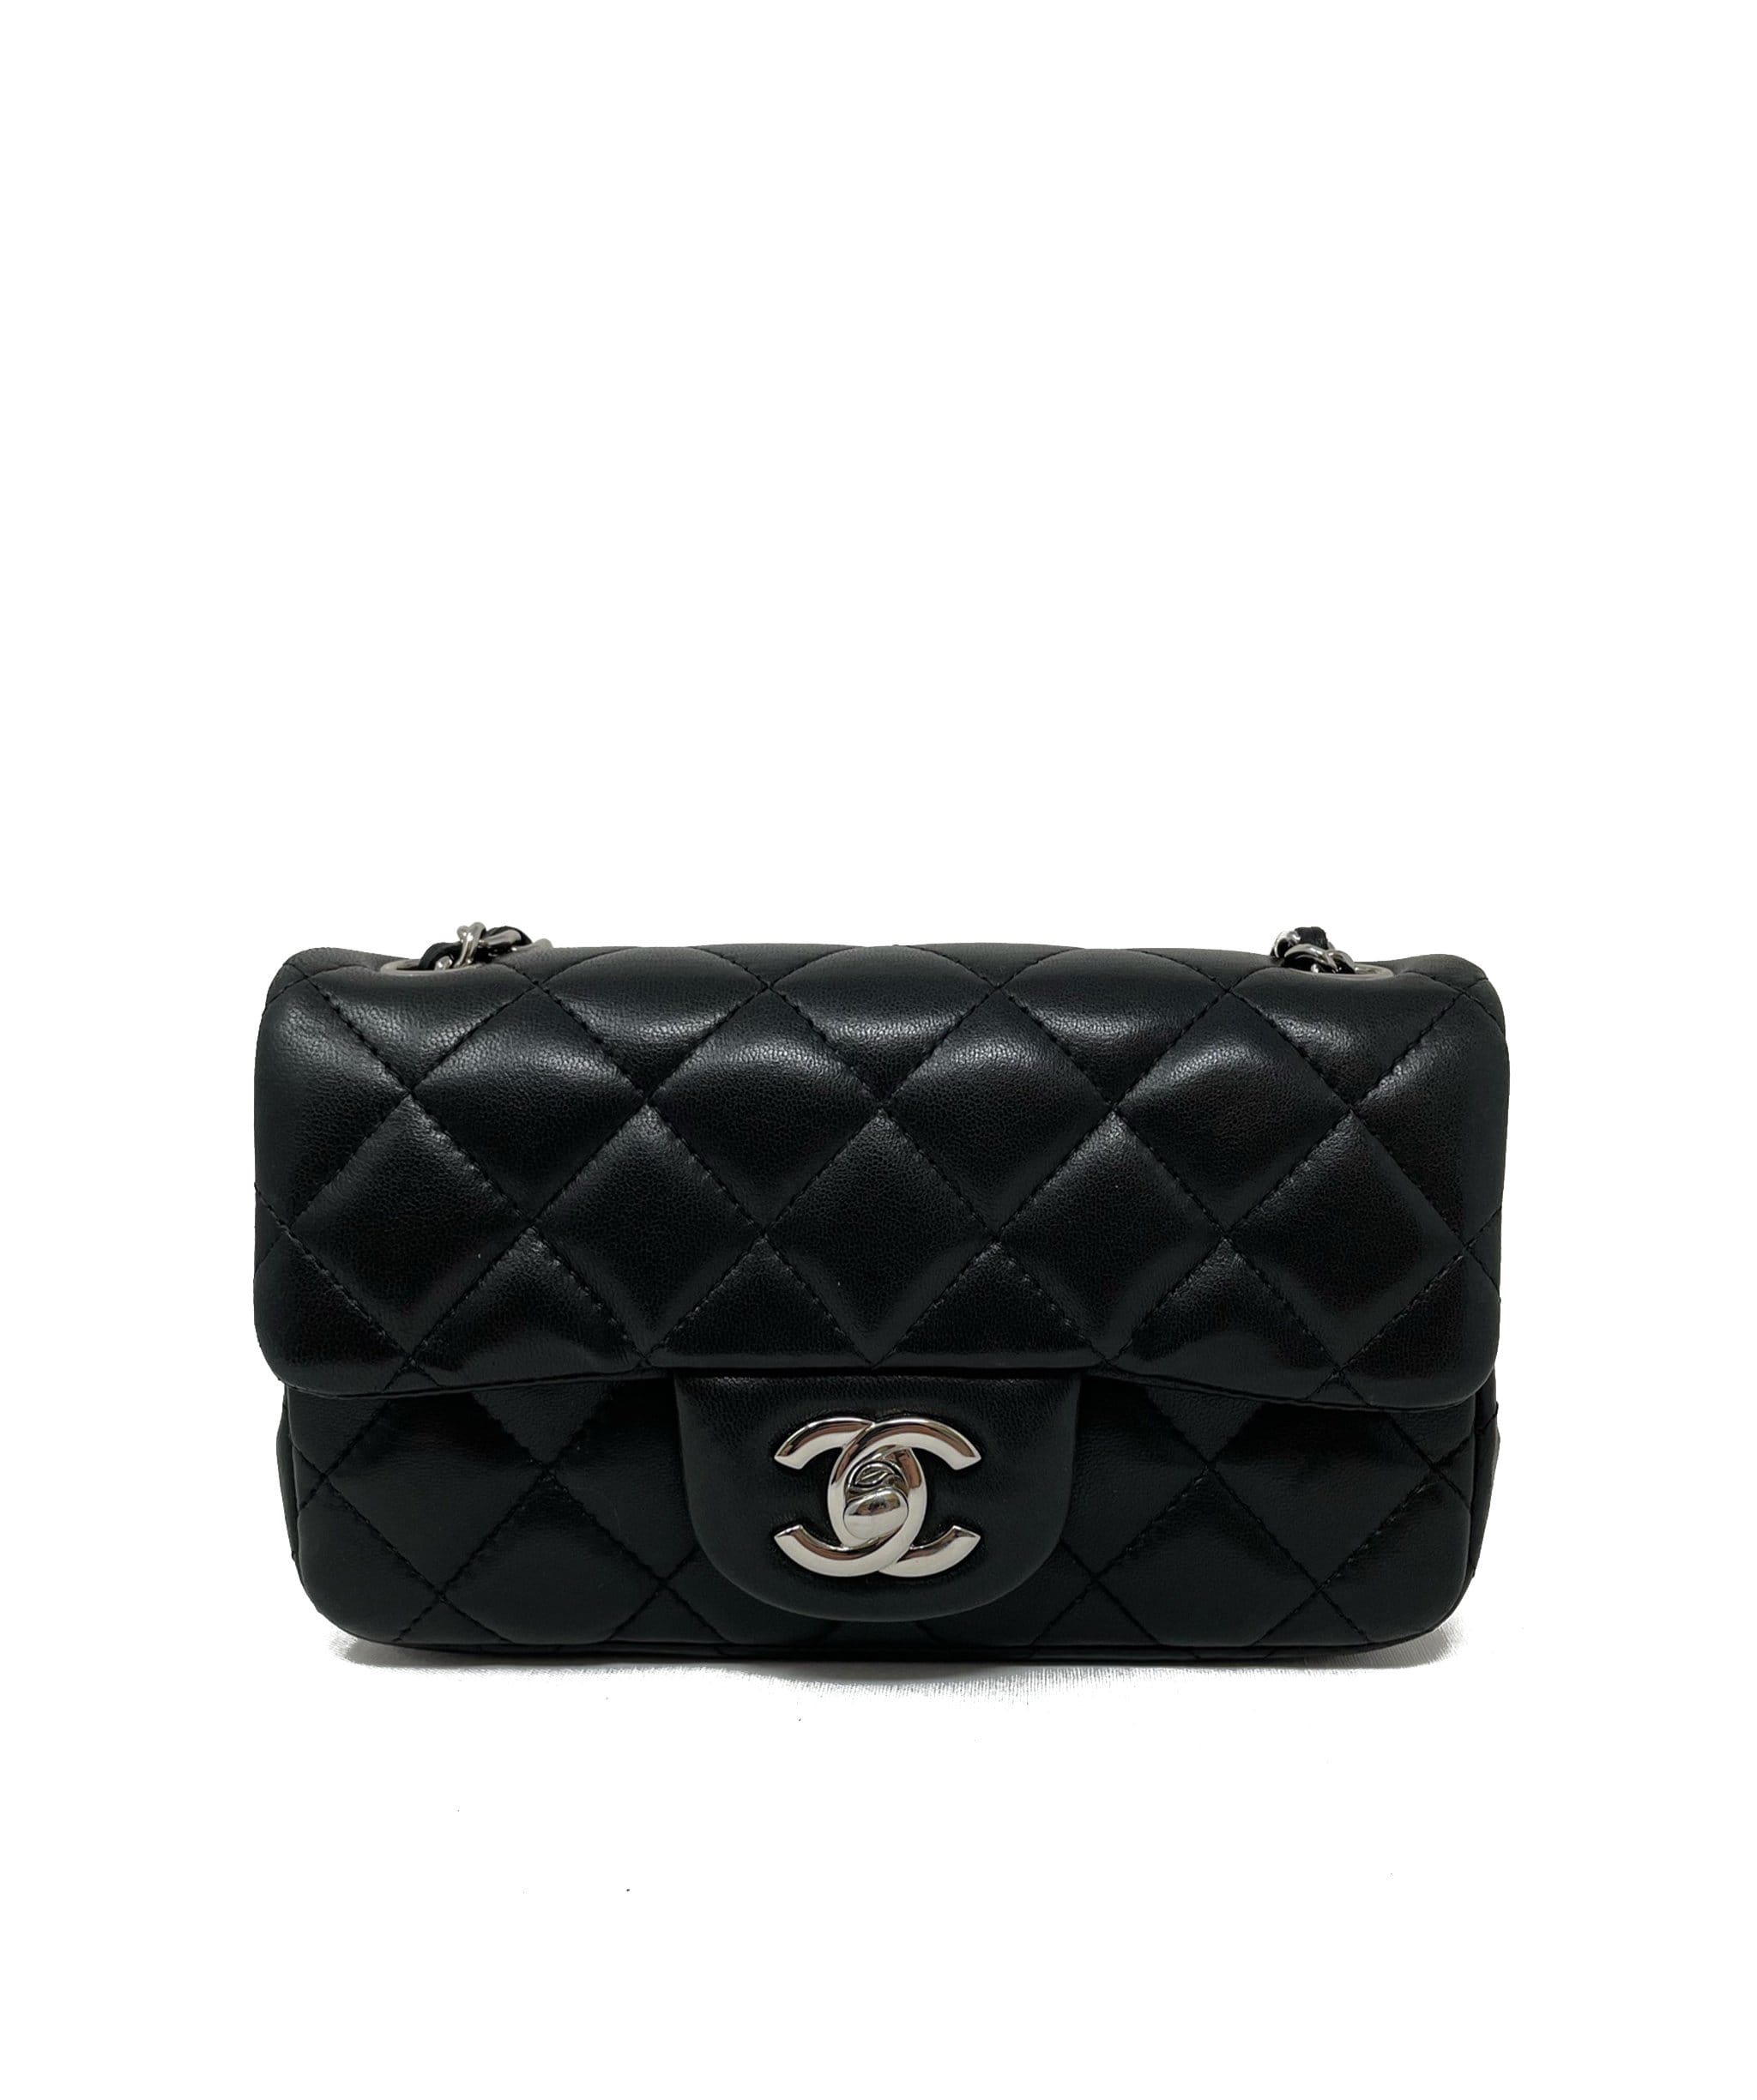 CHANEL Small Bags & CHANEL Classic Flap Handbags for Women